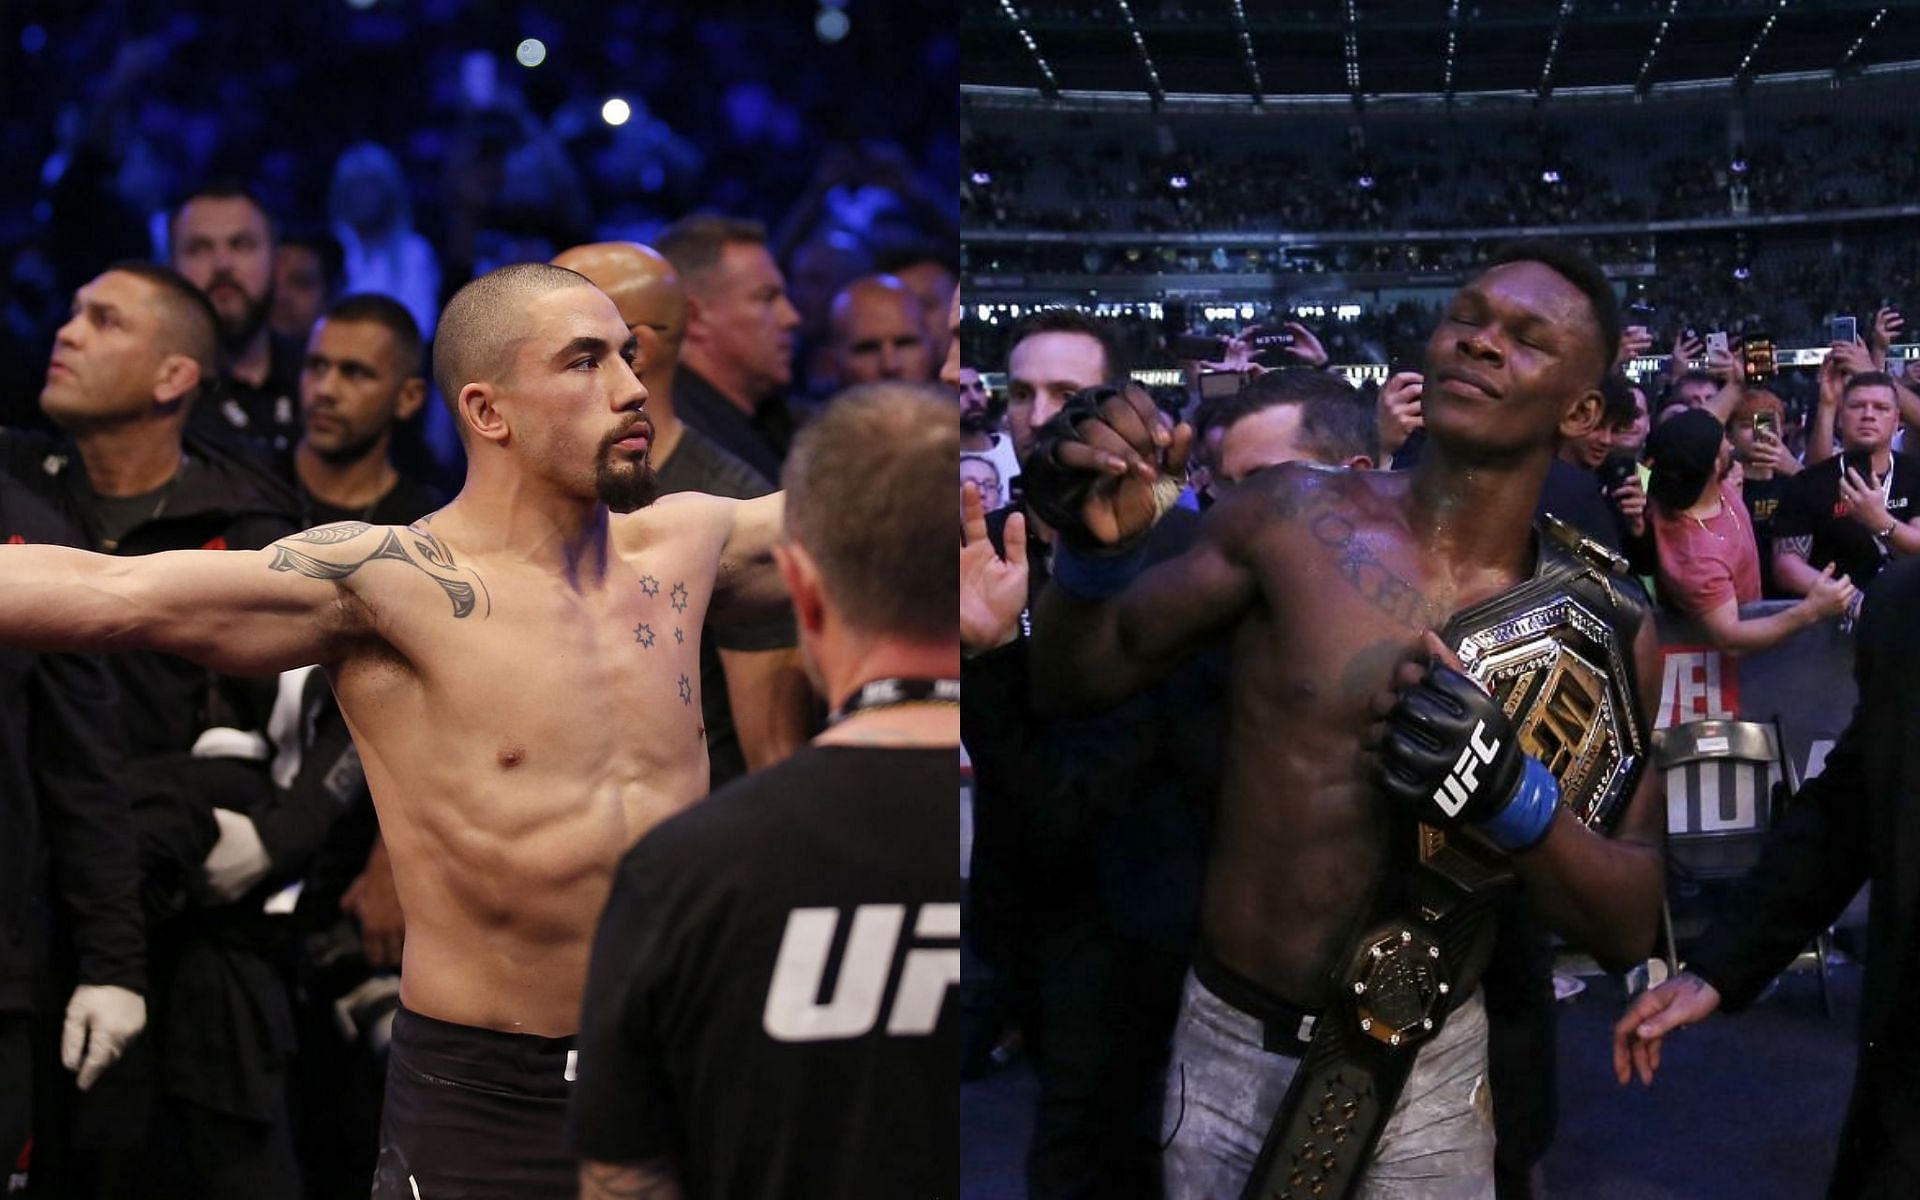 Robert Whittaker has spoken about the troubles he faced heading into his fight against Israel Adesanya